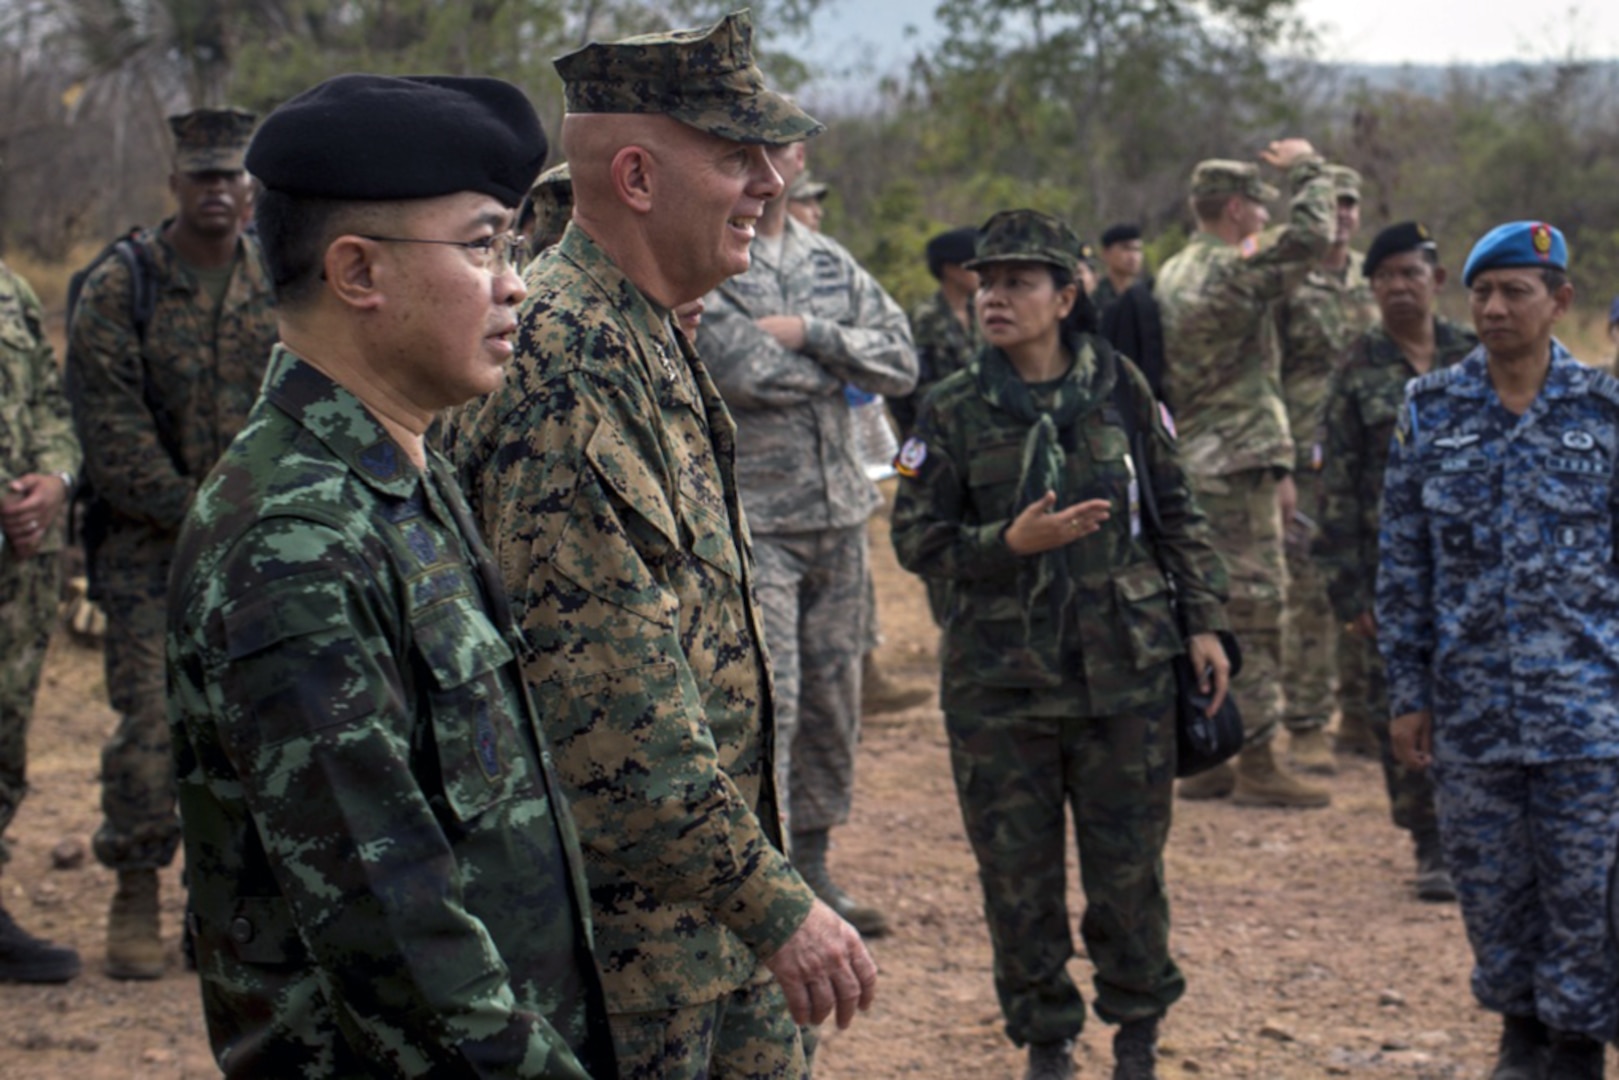 U.S. Marine Corps Lt. Gen. David M. Berger Marine Forces Pacific commanding general, speaks with General Surapong Suwana-ath, Chief of Defence Forces Royal Thai Armed Forces during a combined arms live fire exercise as part of Exercise Cobra Gold 17, in Phu Lam Yai, Nakhon Ratchasima, Thailand.  Cobra Gold is the largest Theater Security Cooperation exercise in the Indo-Asia-Pacific region and is an integral part of the U.S. commitment to strengthen engagement in the region.